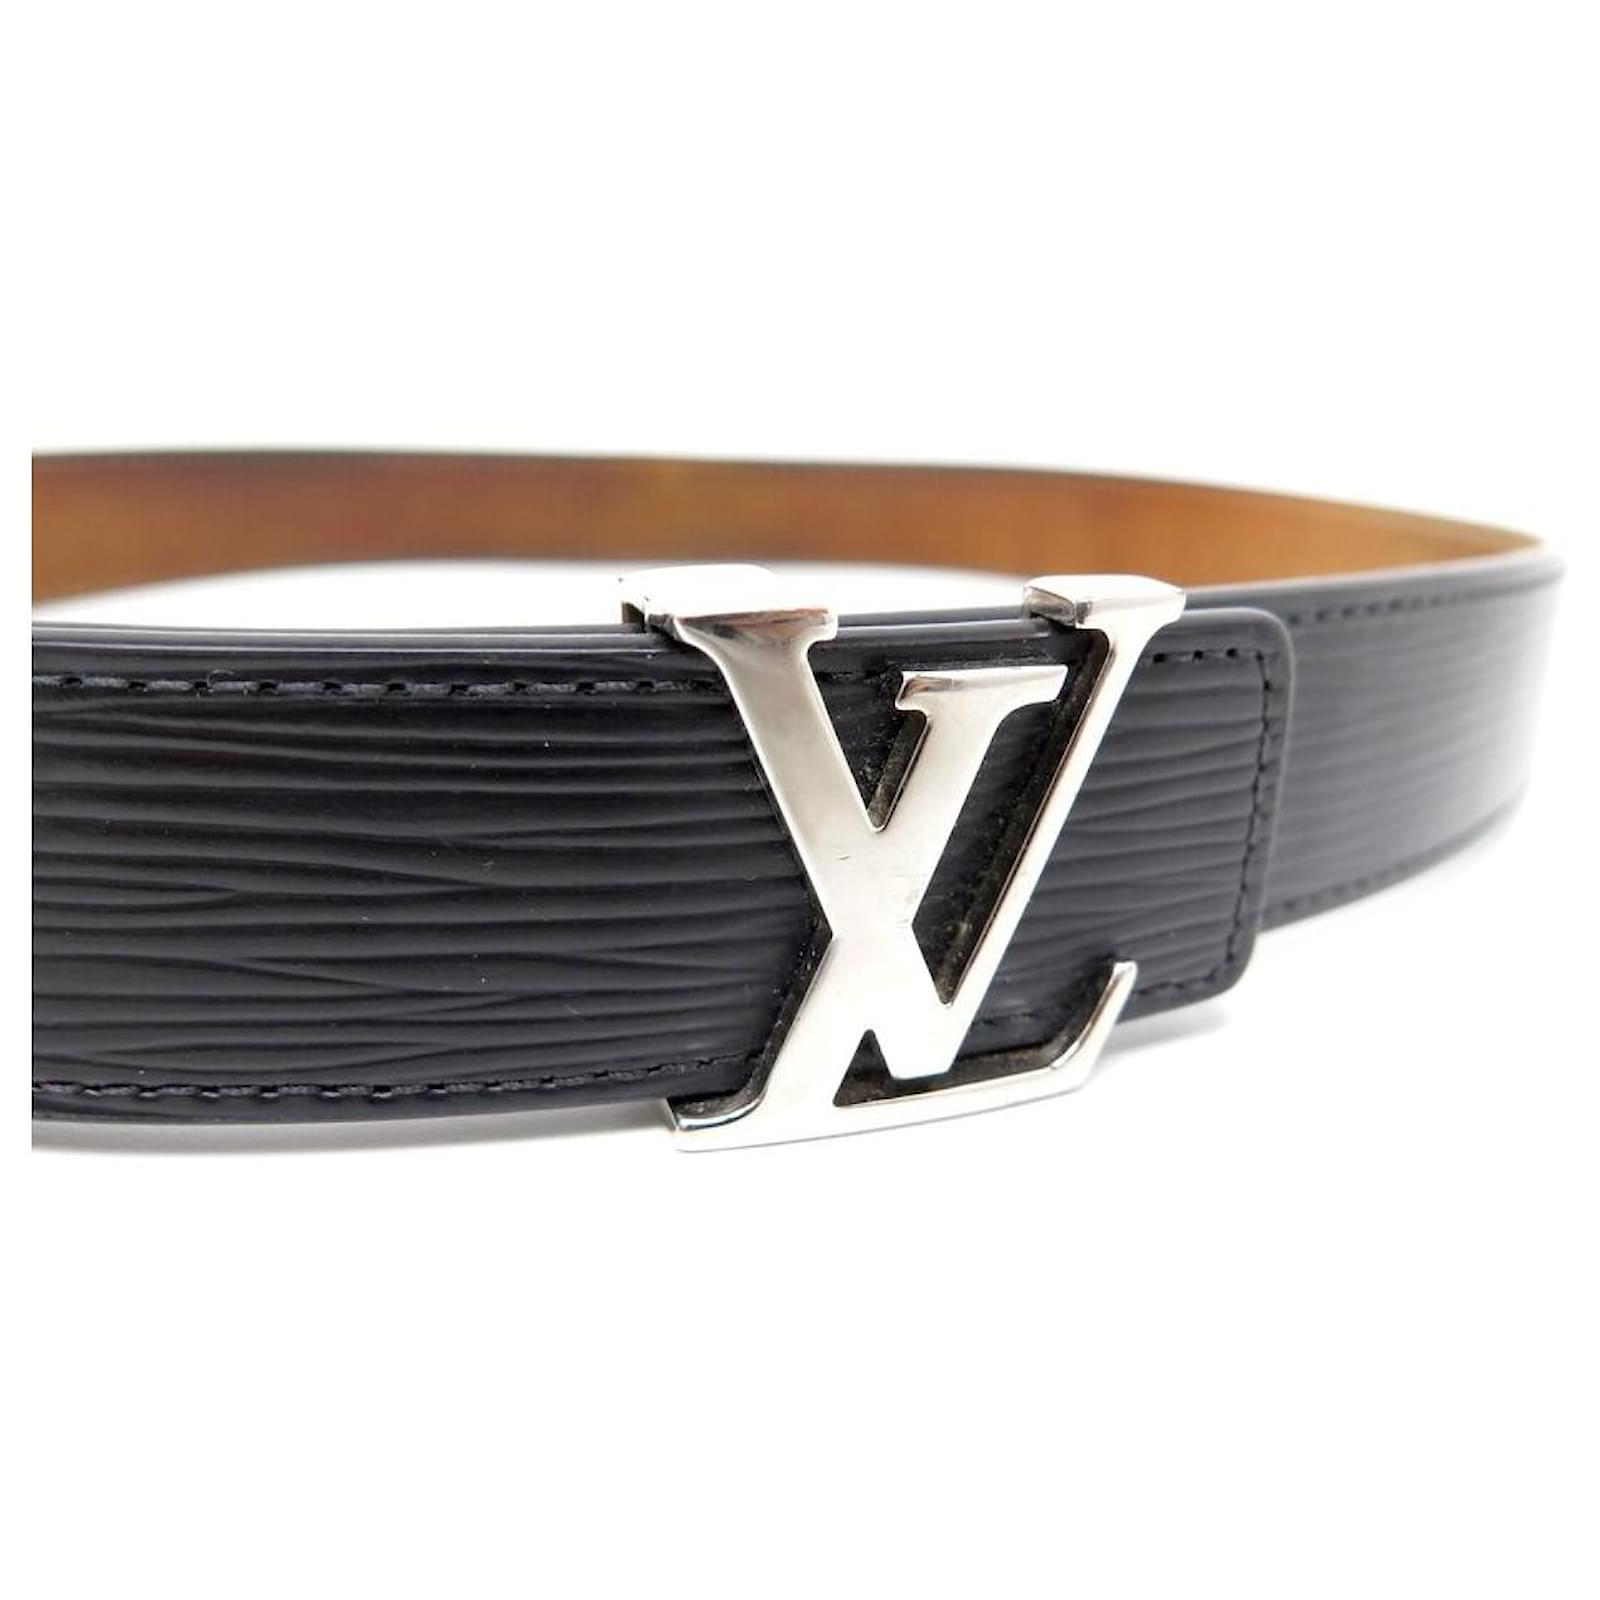 Lv circle leather belt Louis Vuitton Brown size 85 cm in Leather